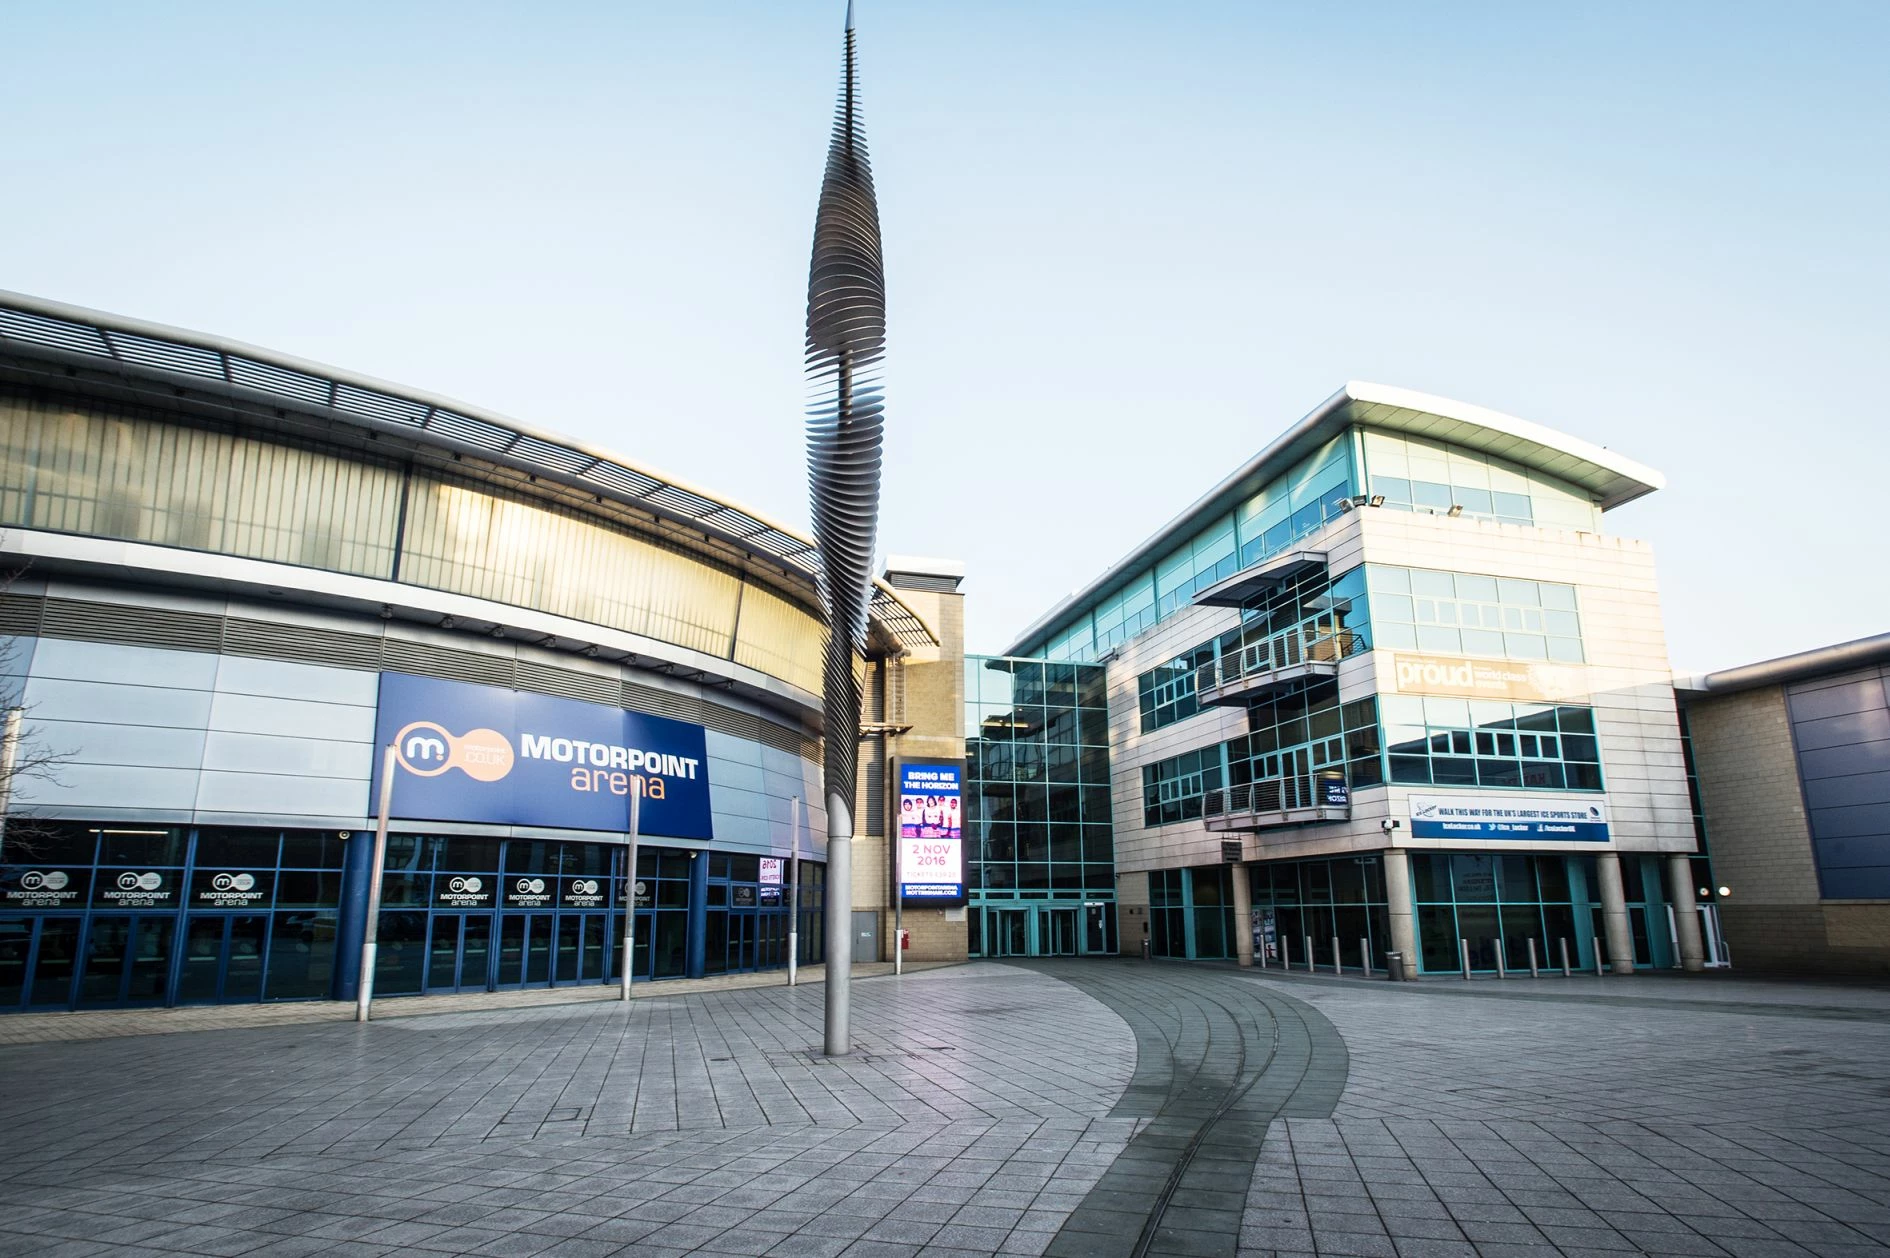 Motorpoint Arena Nottingham and the National Ice Centre